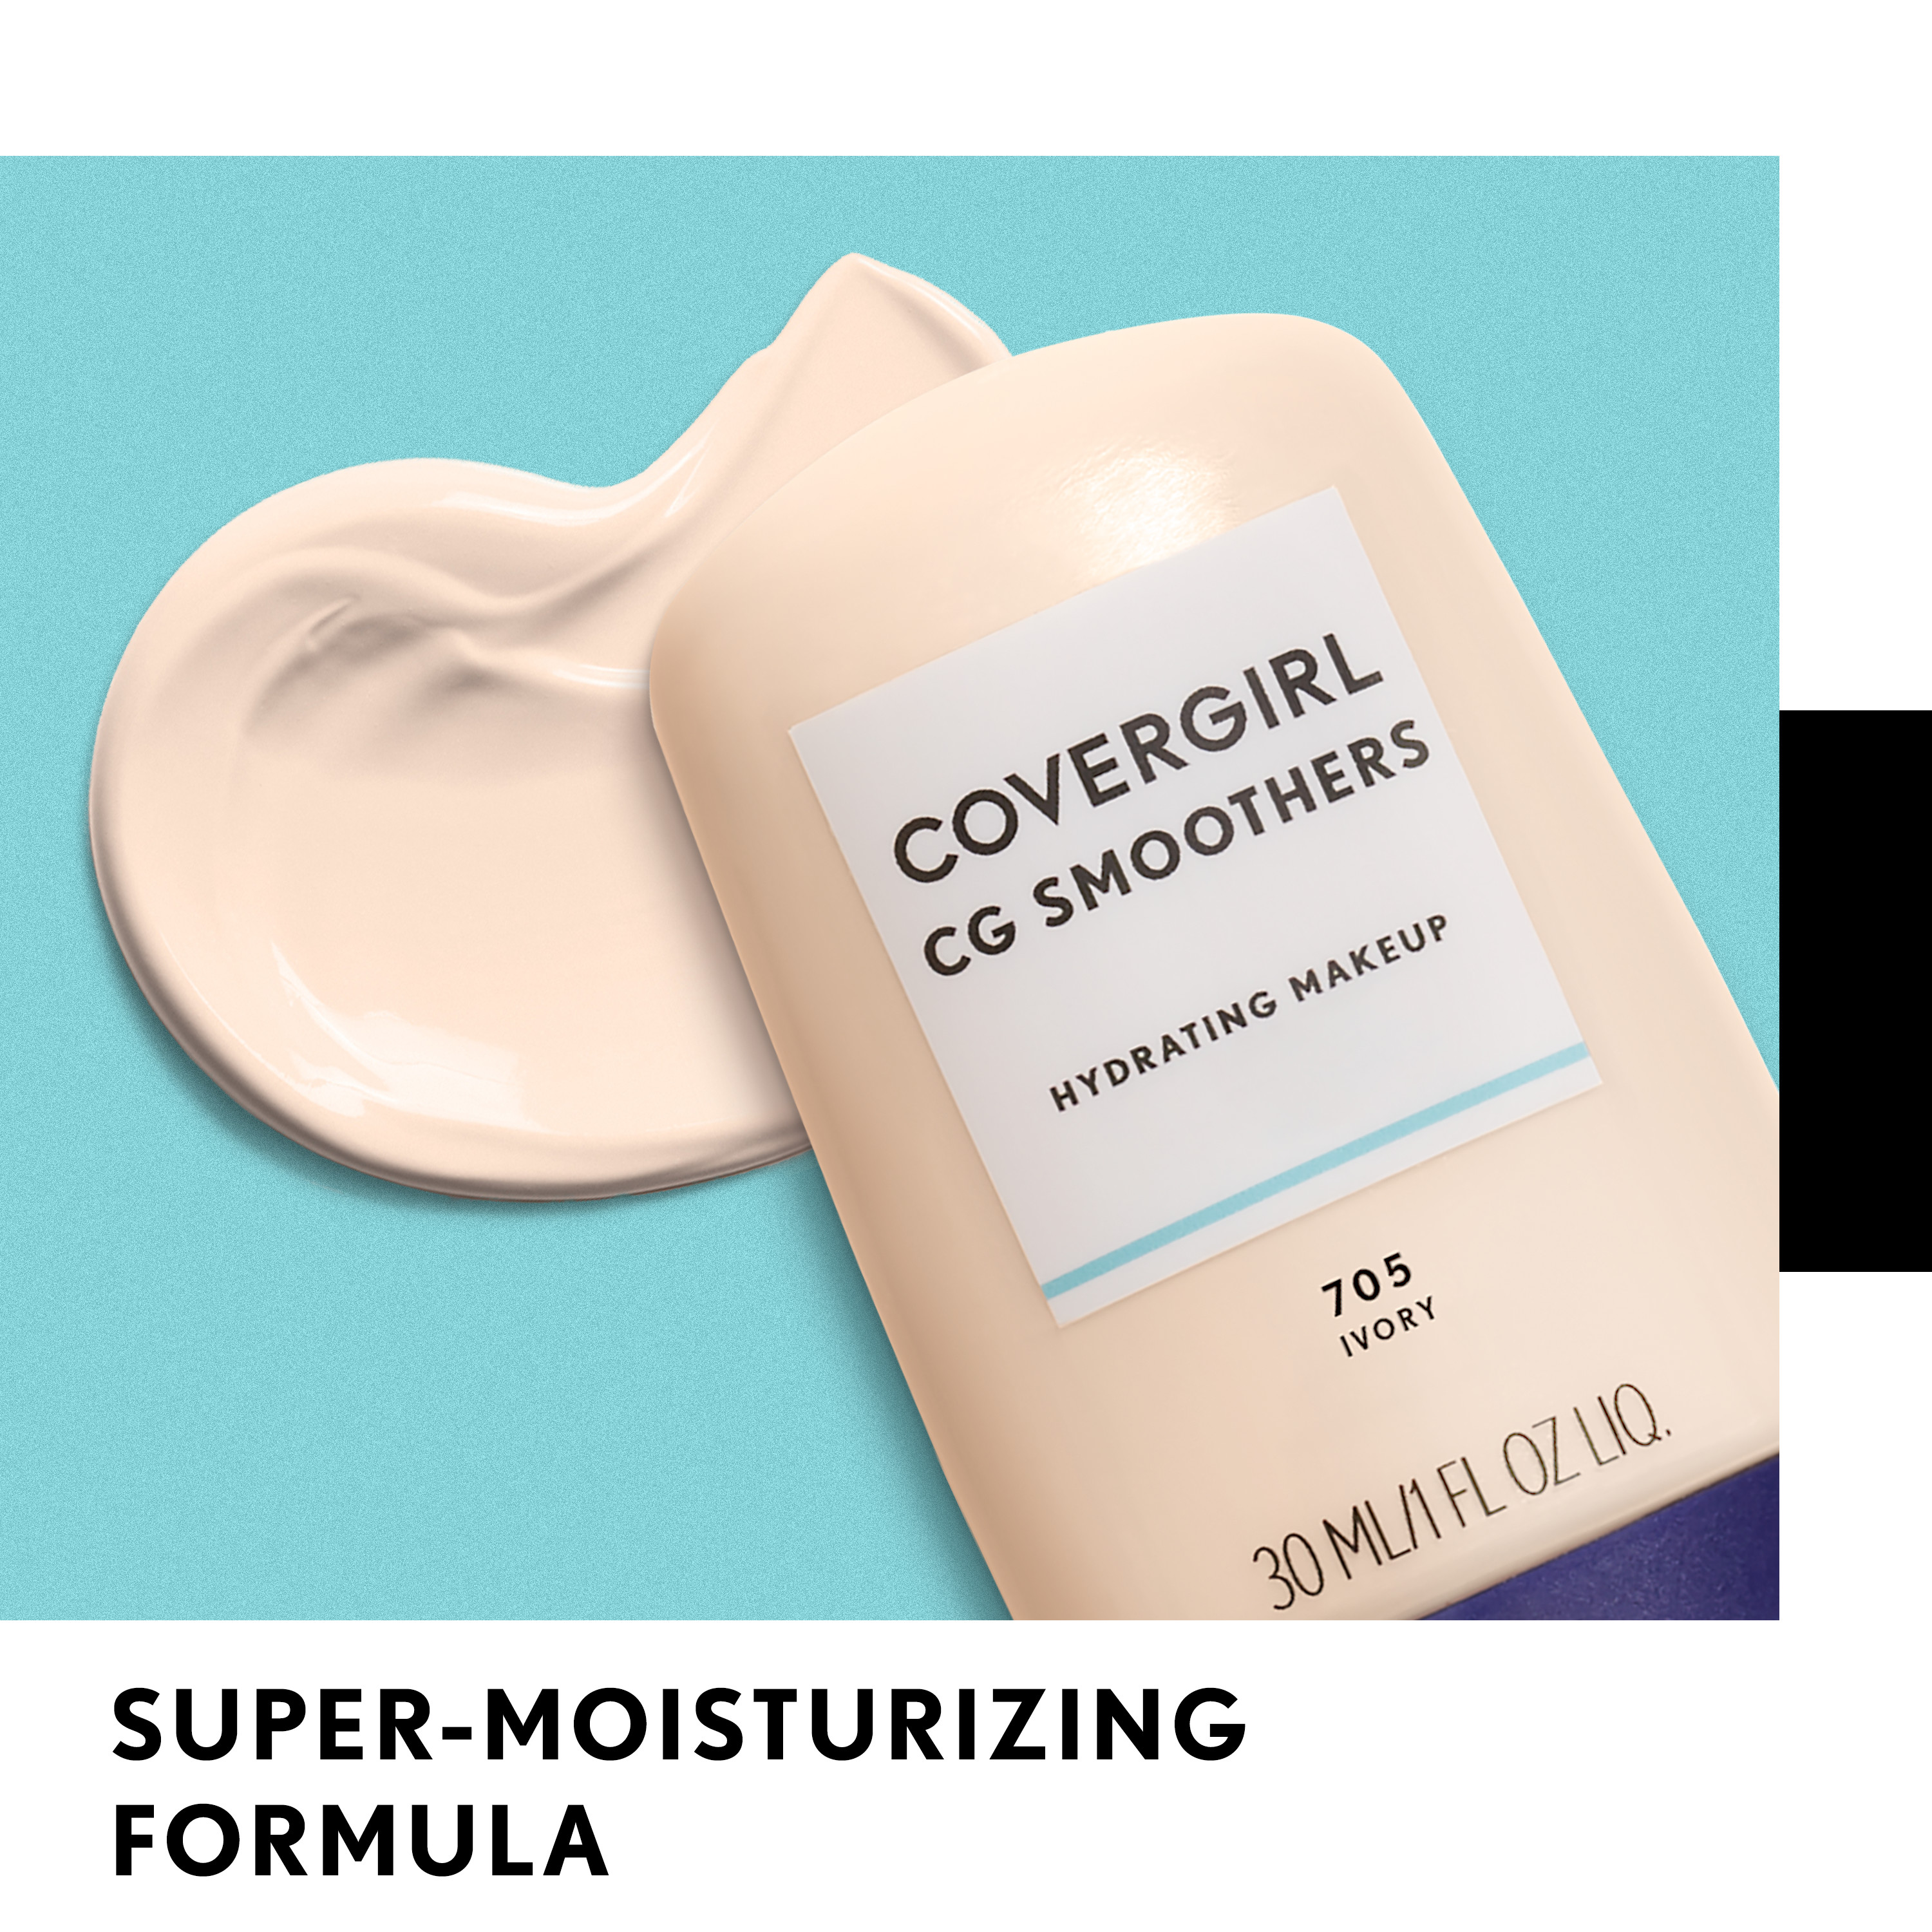 COVERGIRL Smoothers Hydrating Foundation, 705 Ivory, 1 Fl Oz, Hydrating Foundation, Cruelty Free Foundation, Liquid Foundation, Cream Foundation, Moisturizing Foundation - image 4 of 9